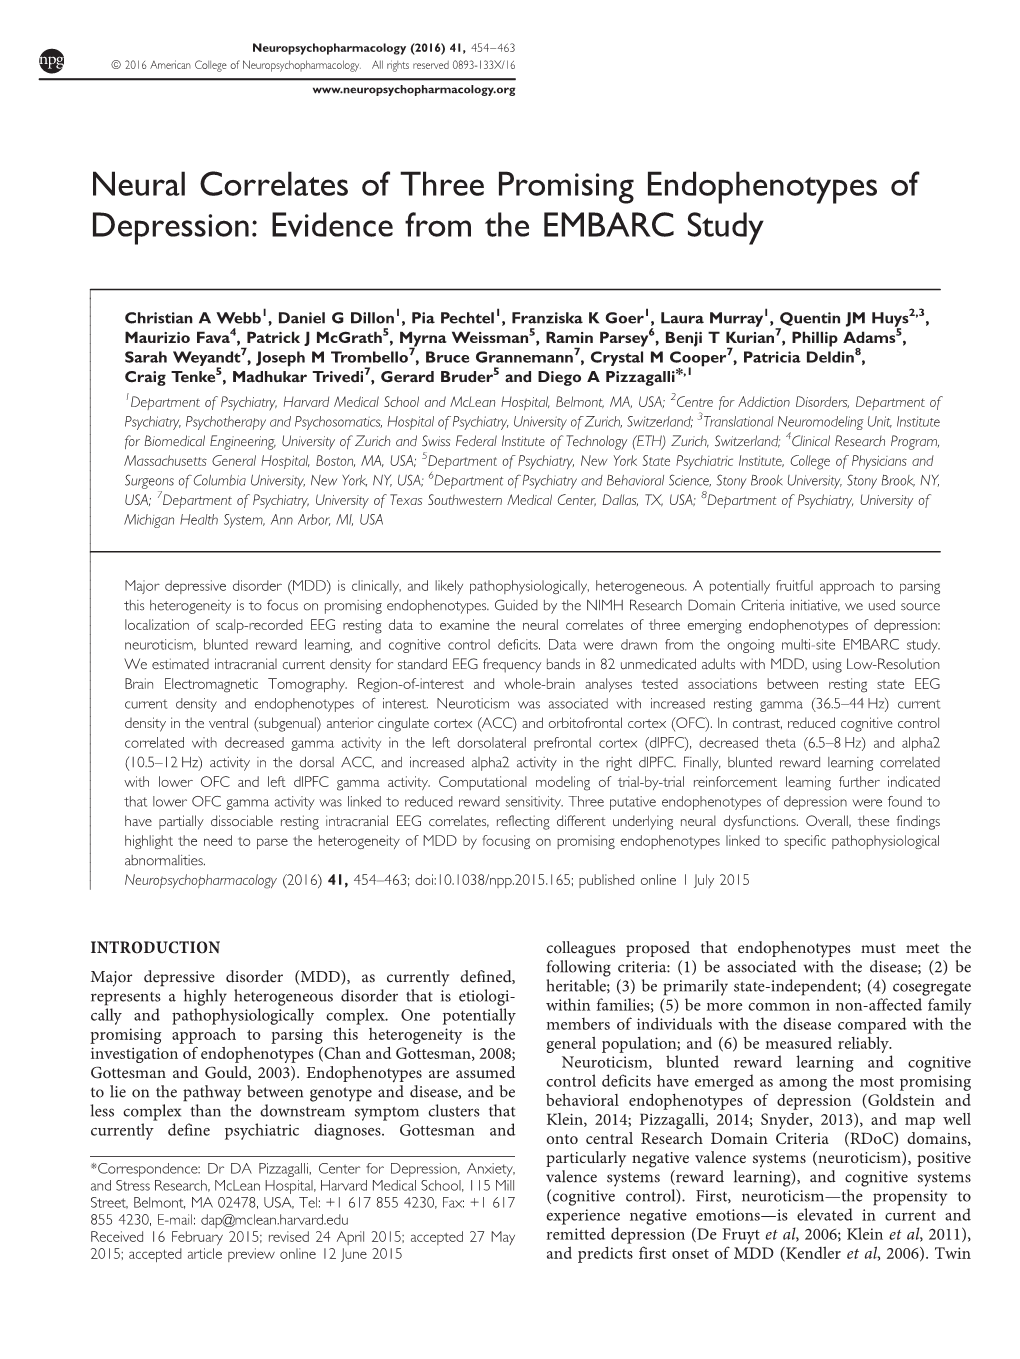 Neural Correlates of Three Promising Endophenotypes of Depression: Evidence from the EMBARC Study